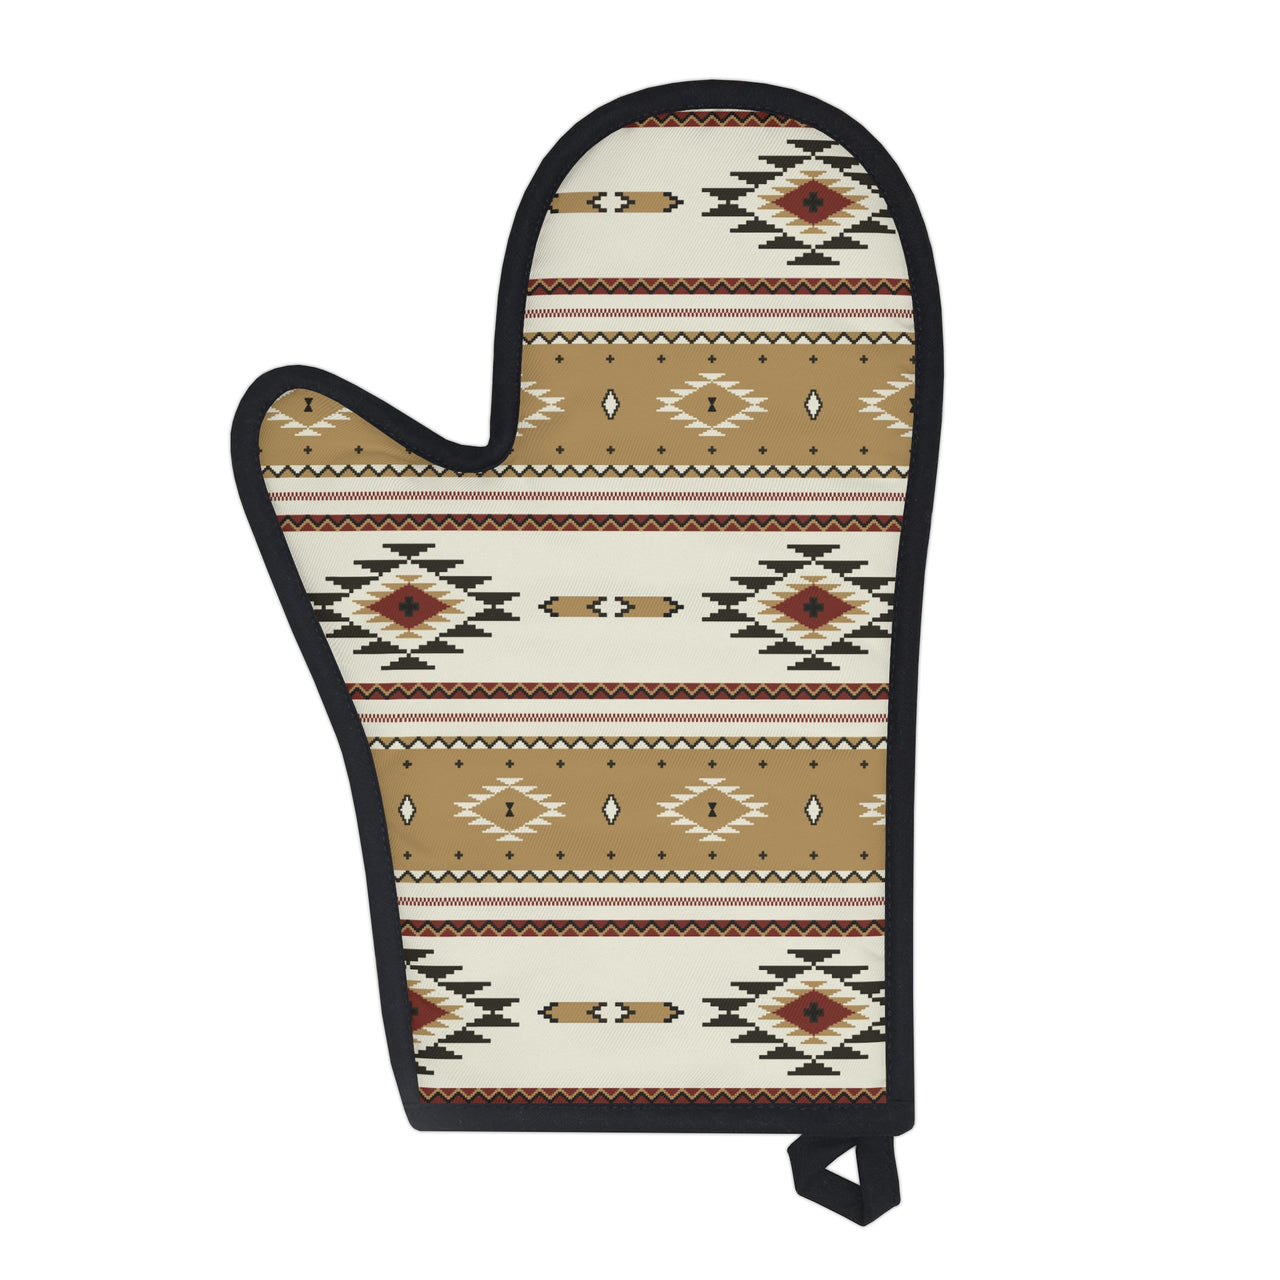 Western Oven Glove, Mexican Blanket Print Oven Glove, Midwestern Oven Glove